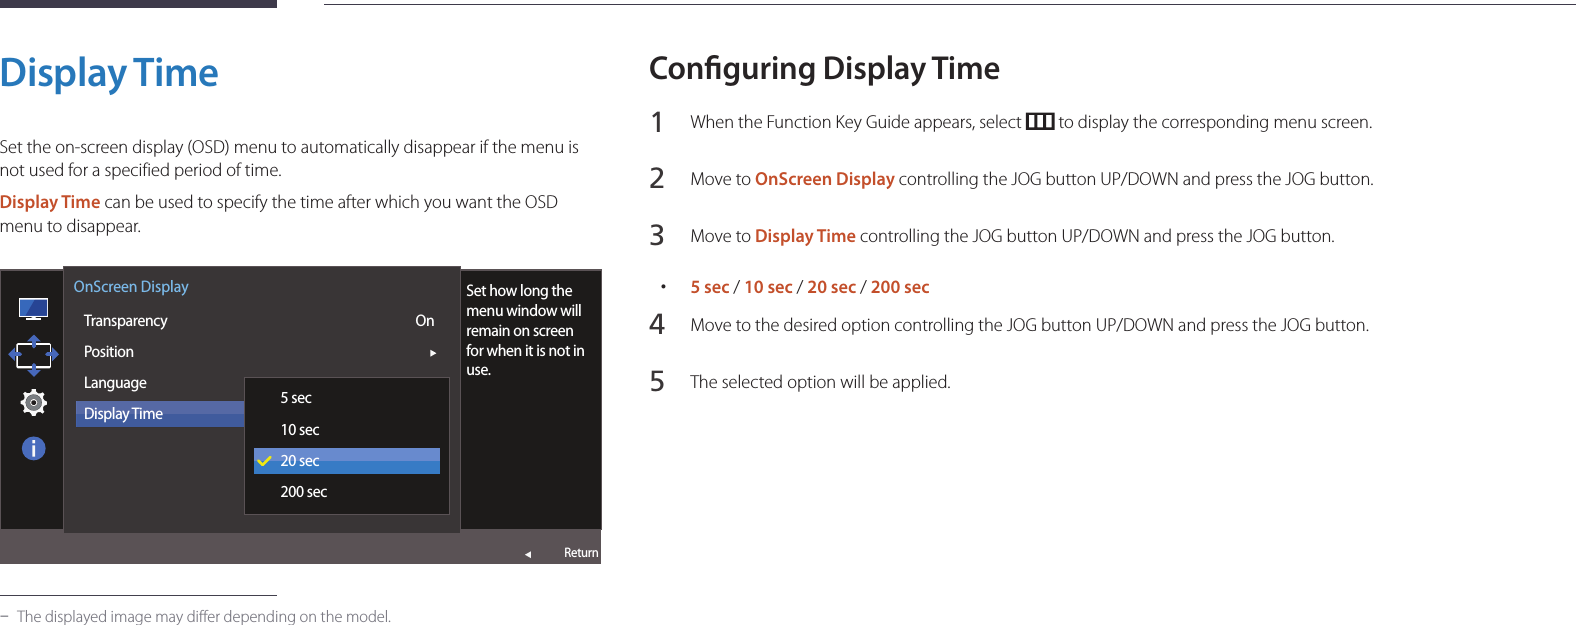 49Display TimeSet the on-screen display (OSD) menu to automatically disappear if the menu is not used for a specified period of time.Display Time can be used to specify the time after which you want the OSD menu to disappear.  OnScreen DisplayTransparencyPositionLanguageDisplay TimeSet how long the menu window will remain on screen for when it is not in use.5 sec10 sec20 sec200 secOnReturn -The displayed image may differ depending on the model.Conguring Display Time1 When the Function Key Guide appears, select   to display the corresponding menu screen.2 Move to OnScreen Display controlling the JOG button UP/DOWN and press the JOG button.3 Move to Display Time controlling the JOG button UP/DOWN and press the JOG button. •5 sec / 10 sec / 20 sec / 200 sec4 Move to the desired option controlling the JOG button UP/DOWN and press the JOG button.5 The selected option will be applied.